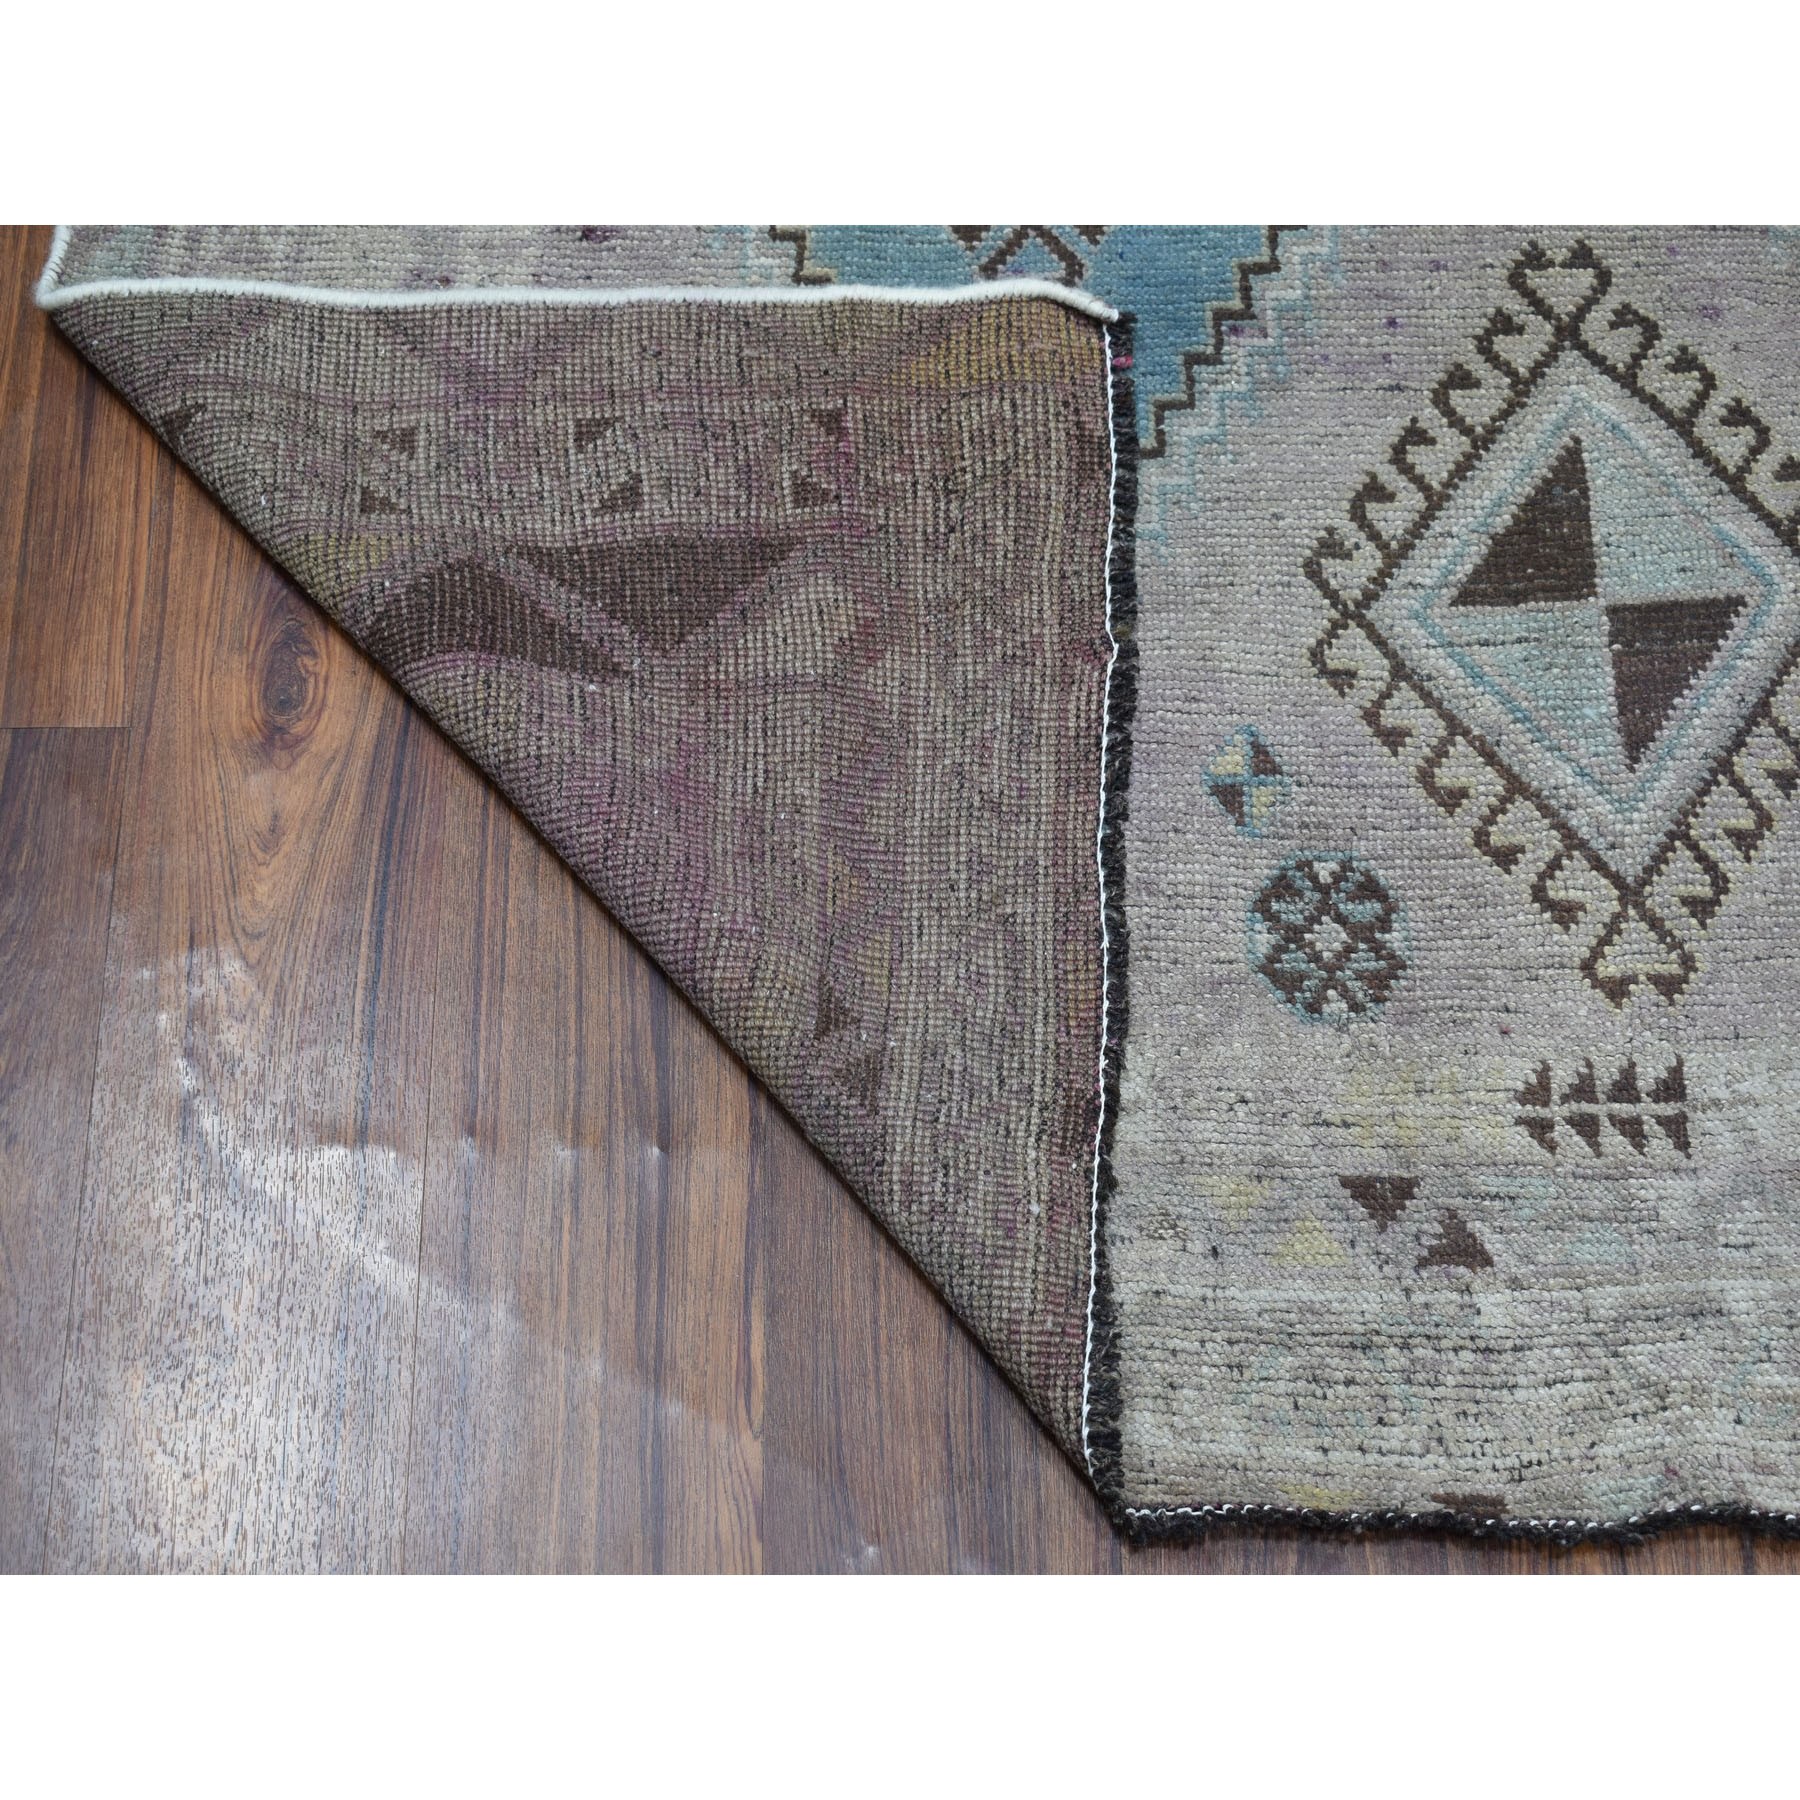 5-x9- Vintage And Worn Down Distressed Colors Persian Shiraz Hand Knotted Bohemian Rug 